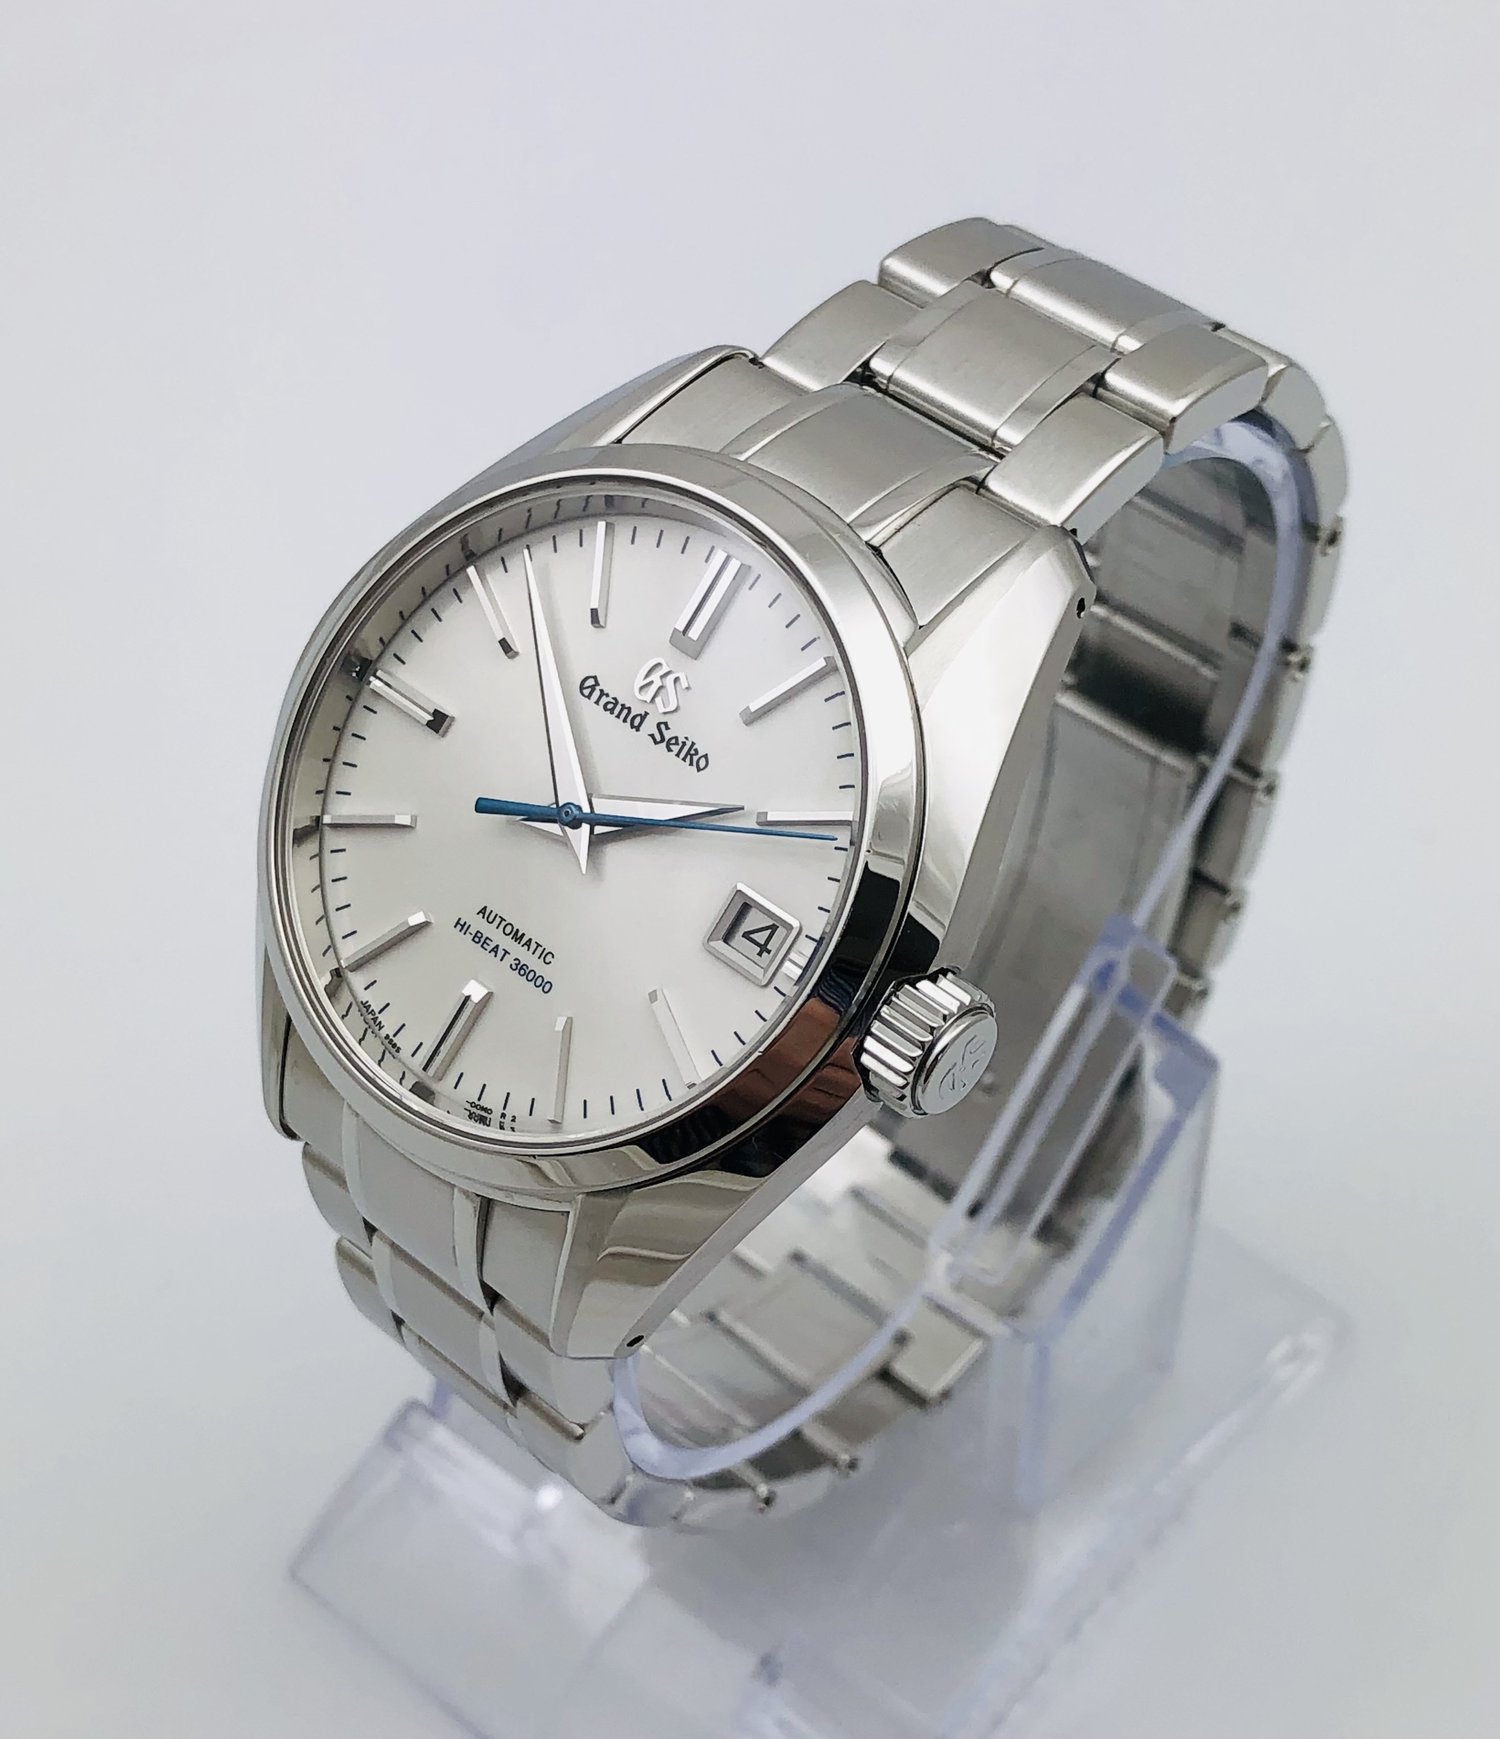 Grand Seiko Heritage Collection Hi-Beat SBGH201 Stainless Steel Automatic  Wristwatch Box and Papers from 2020 — About Time